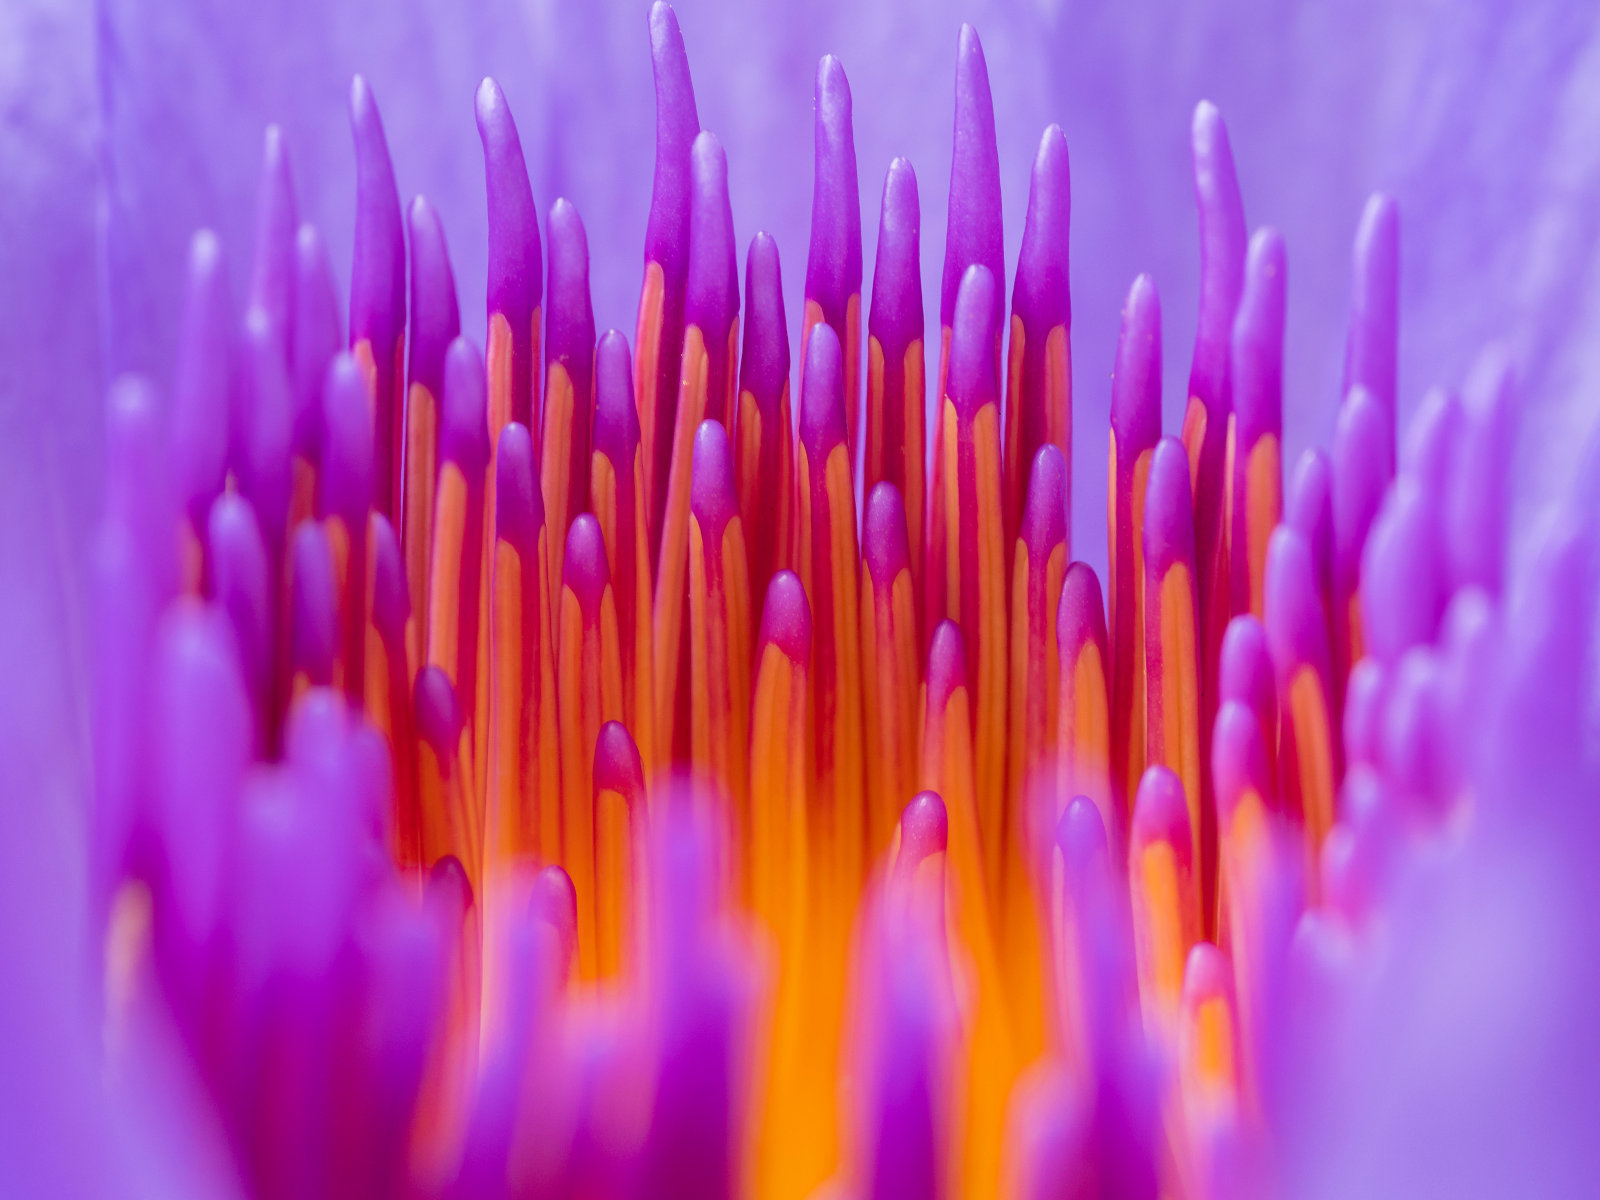 Close up photograph of a flower, where the stamens could almost be a bar chart